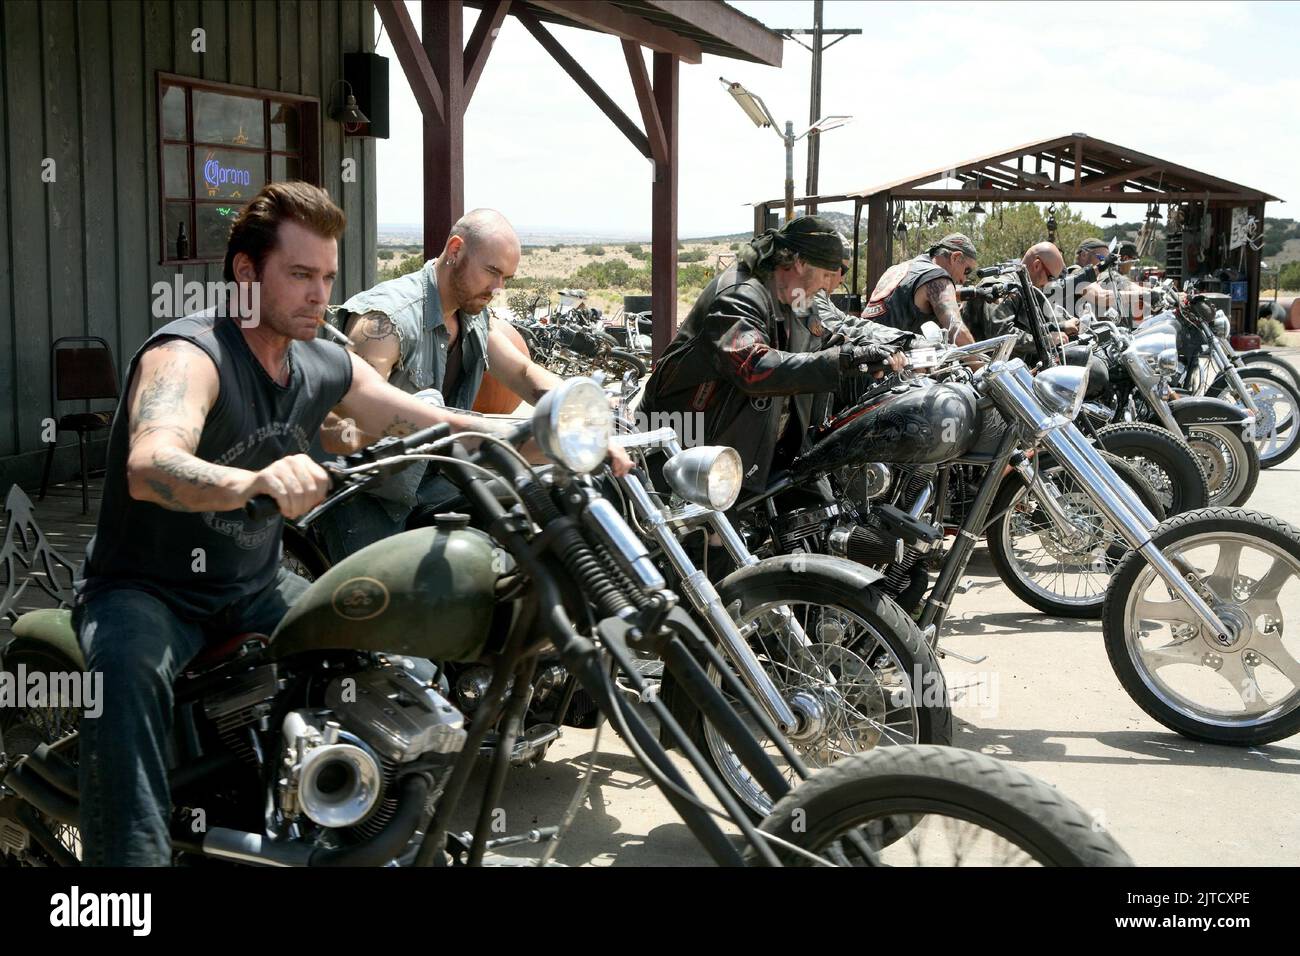 RAY LIOTTA, KEVIN DURAND, M.C. GAINEY, WILD HOGS, 2007 Stock Photo